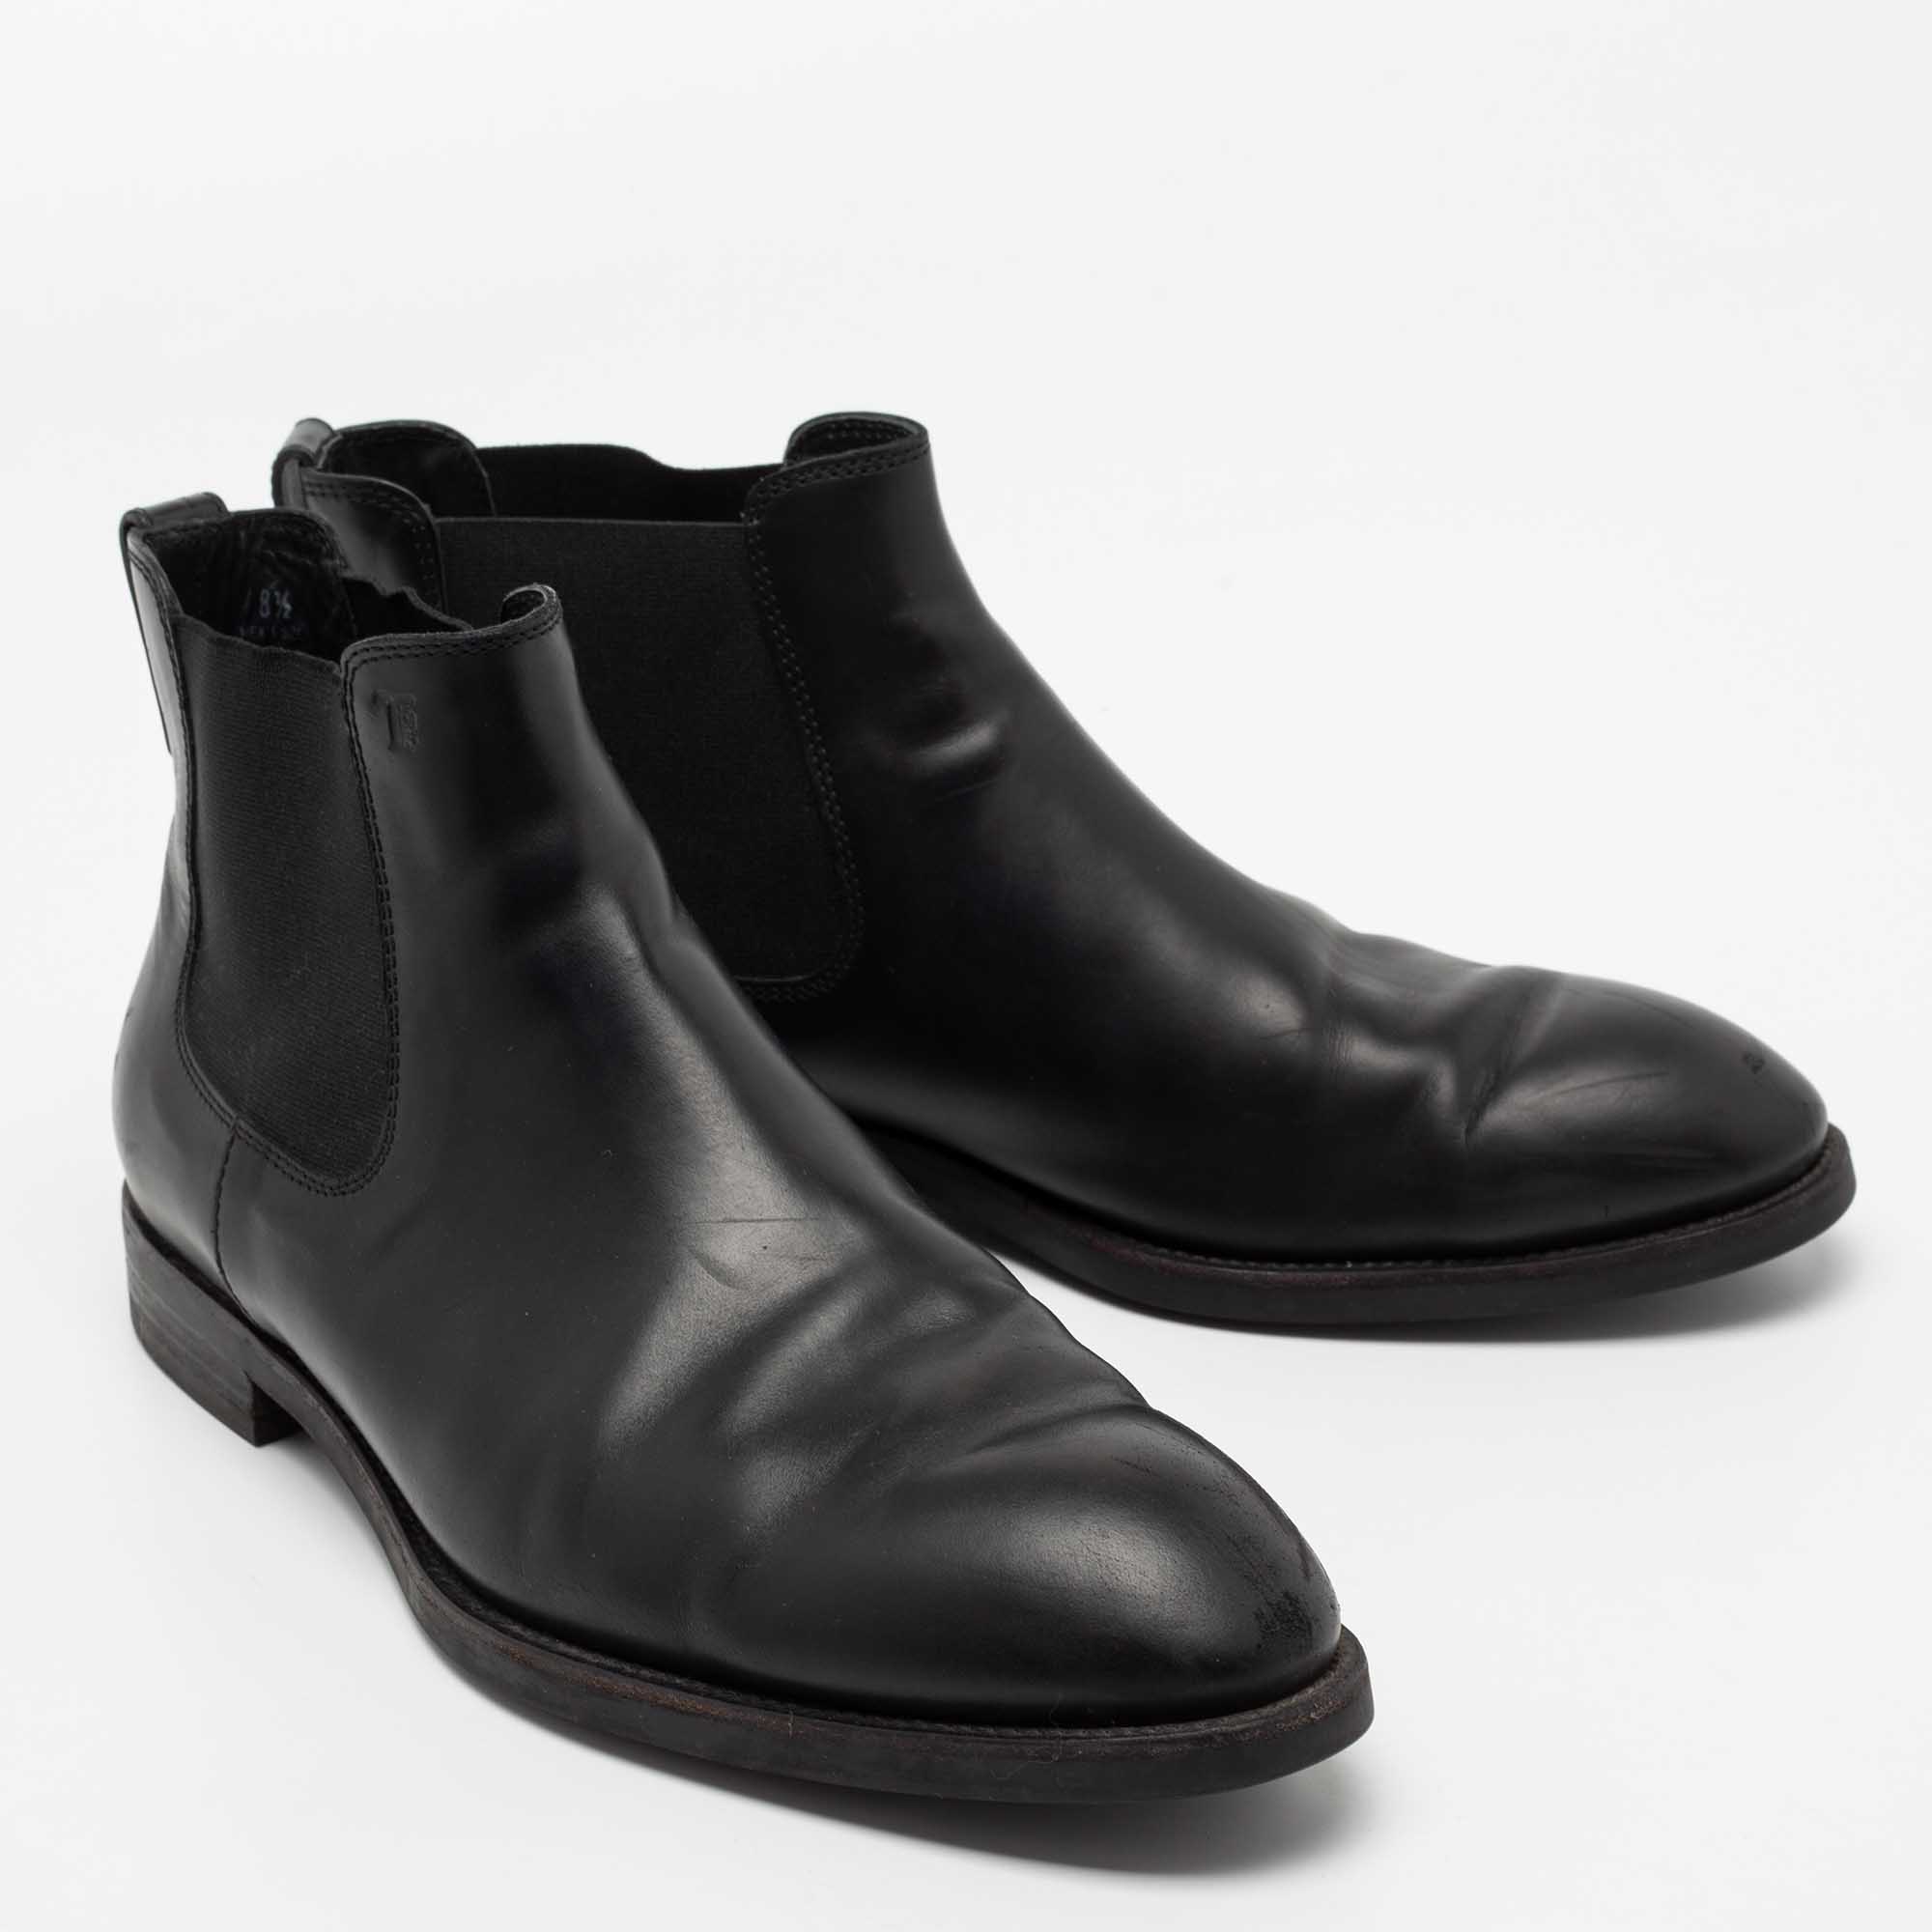 Tod's Black Leather Ankle Length Boots Size 42.5